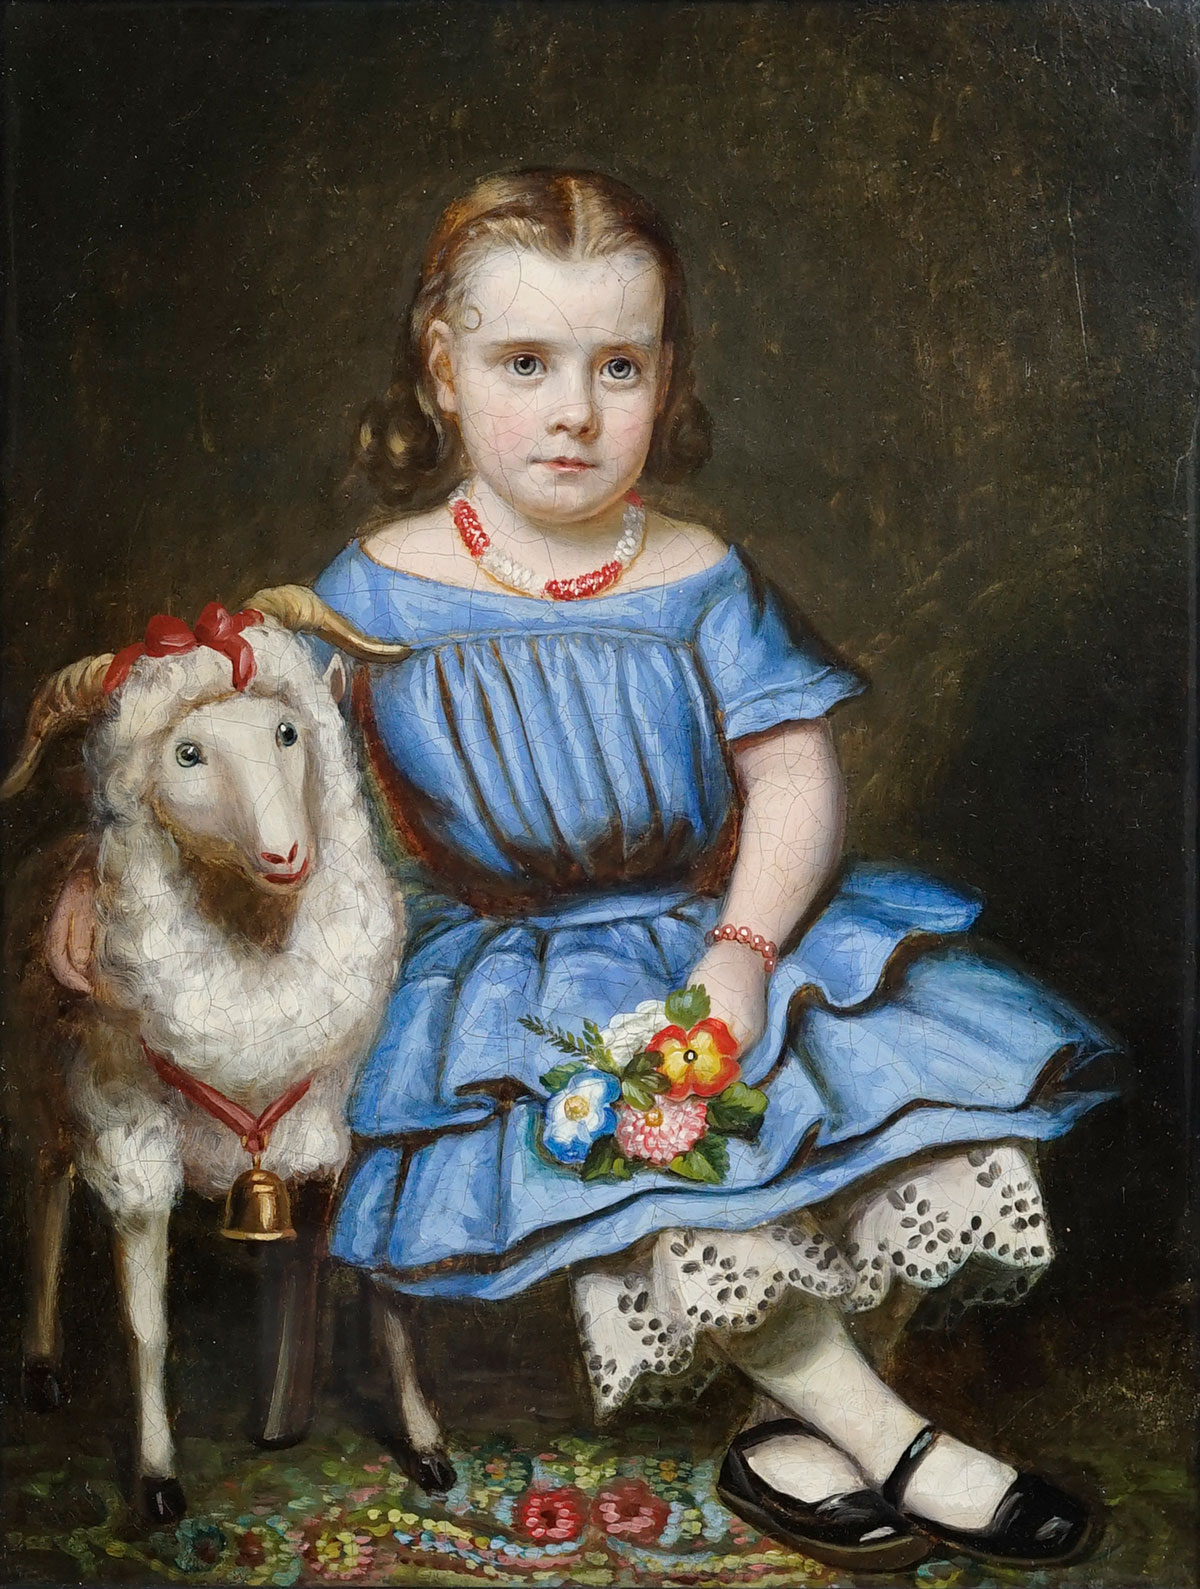 EARLY PORTRAIT PAINTING OF A YOUNG